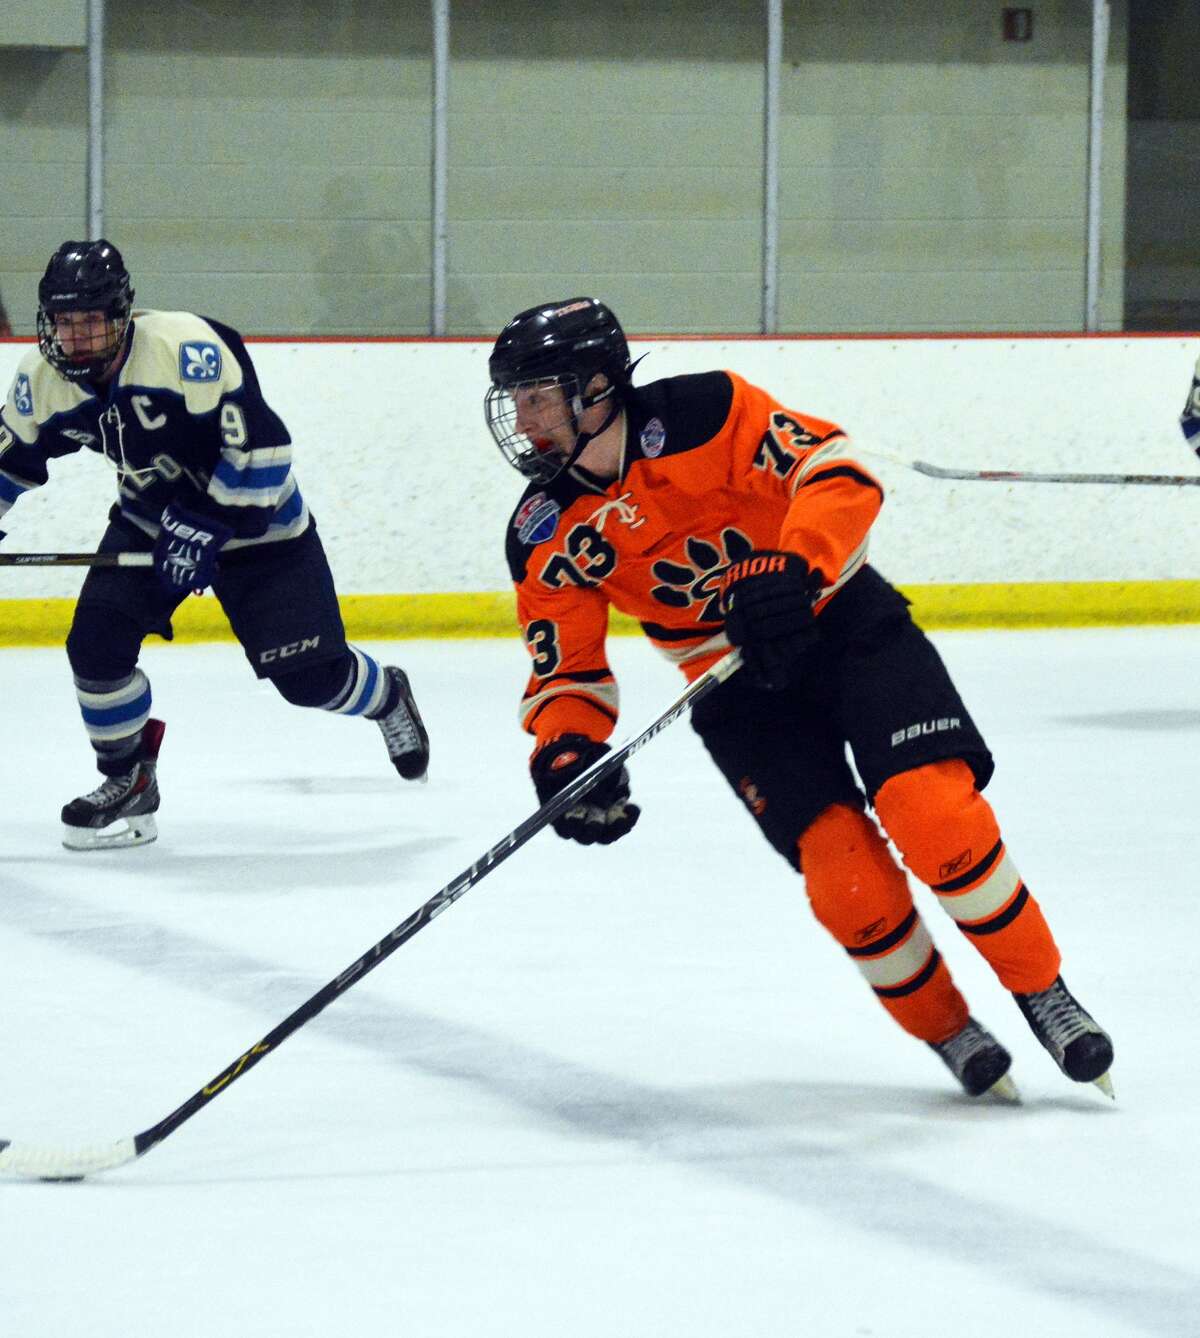 Edwardsville’s Lucas Tucker, right, carries the puck over the blue line in the second period.